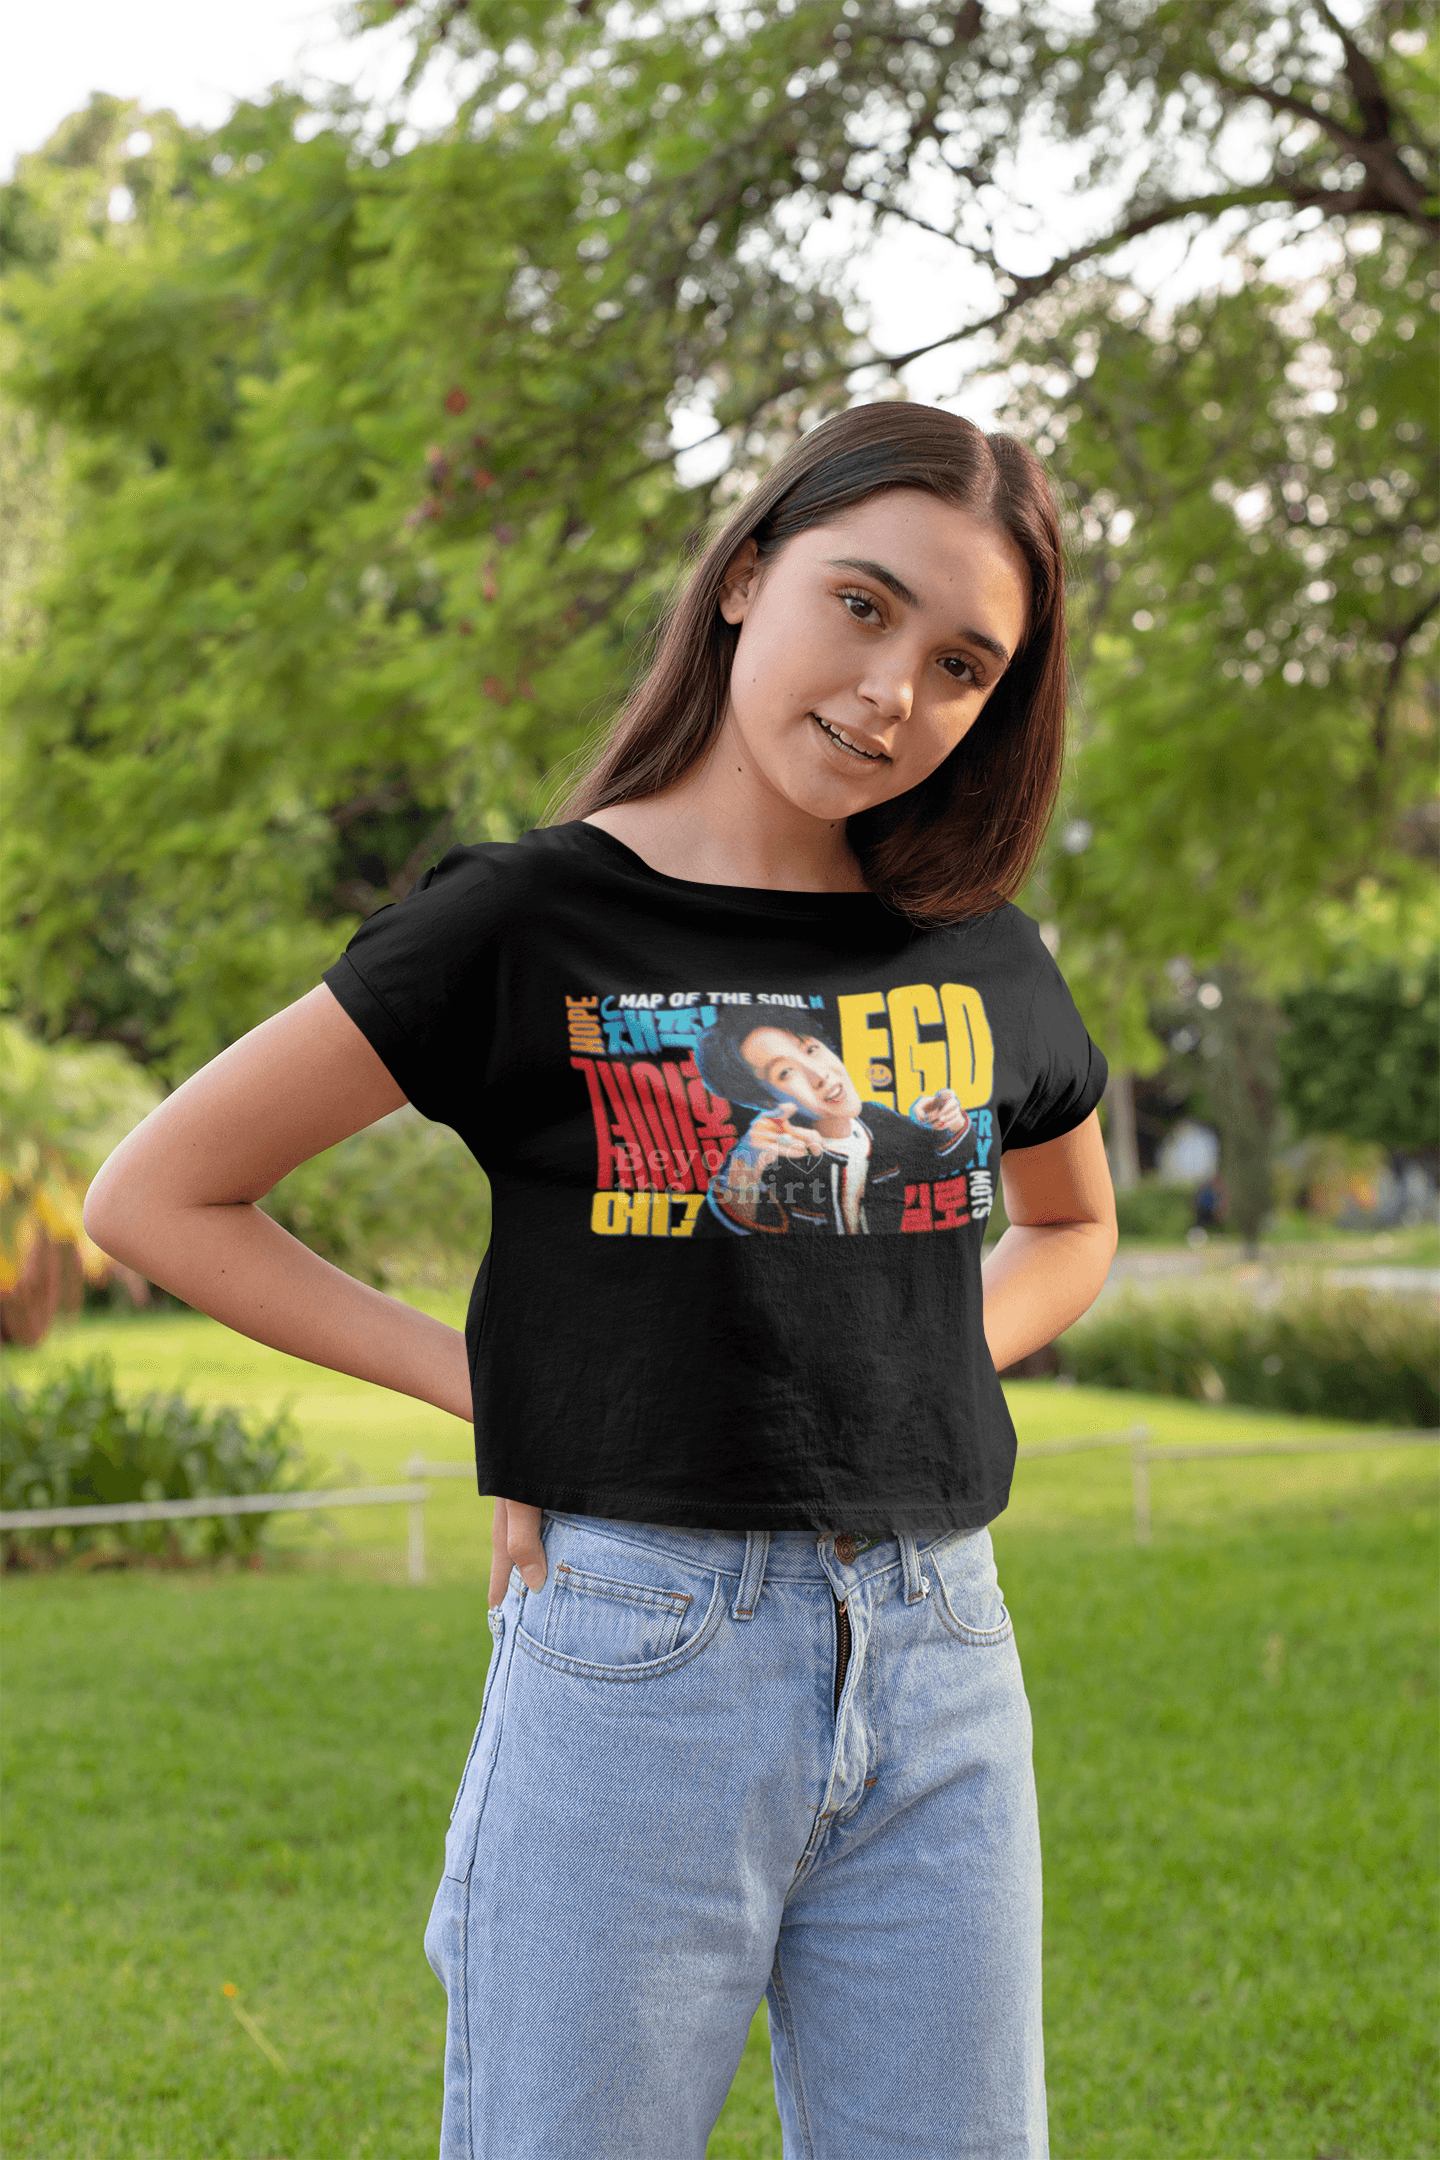 Ego Crop Tops Shirts and Hoodies